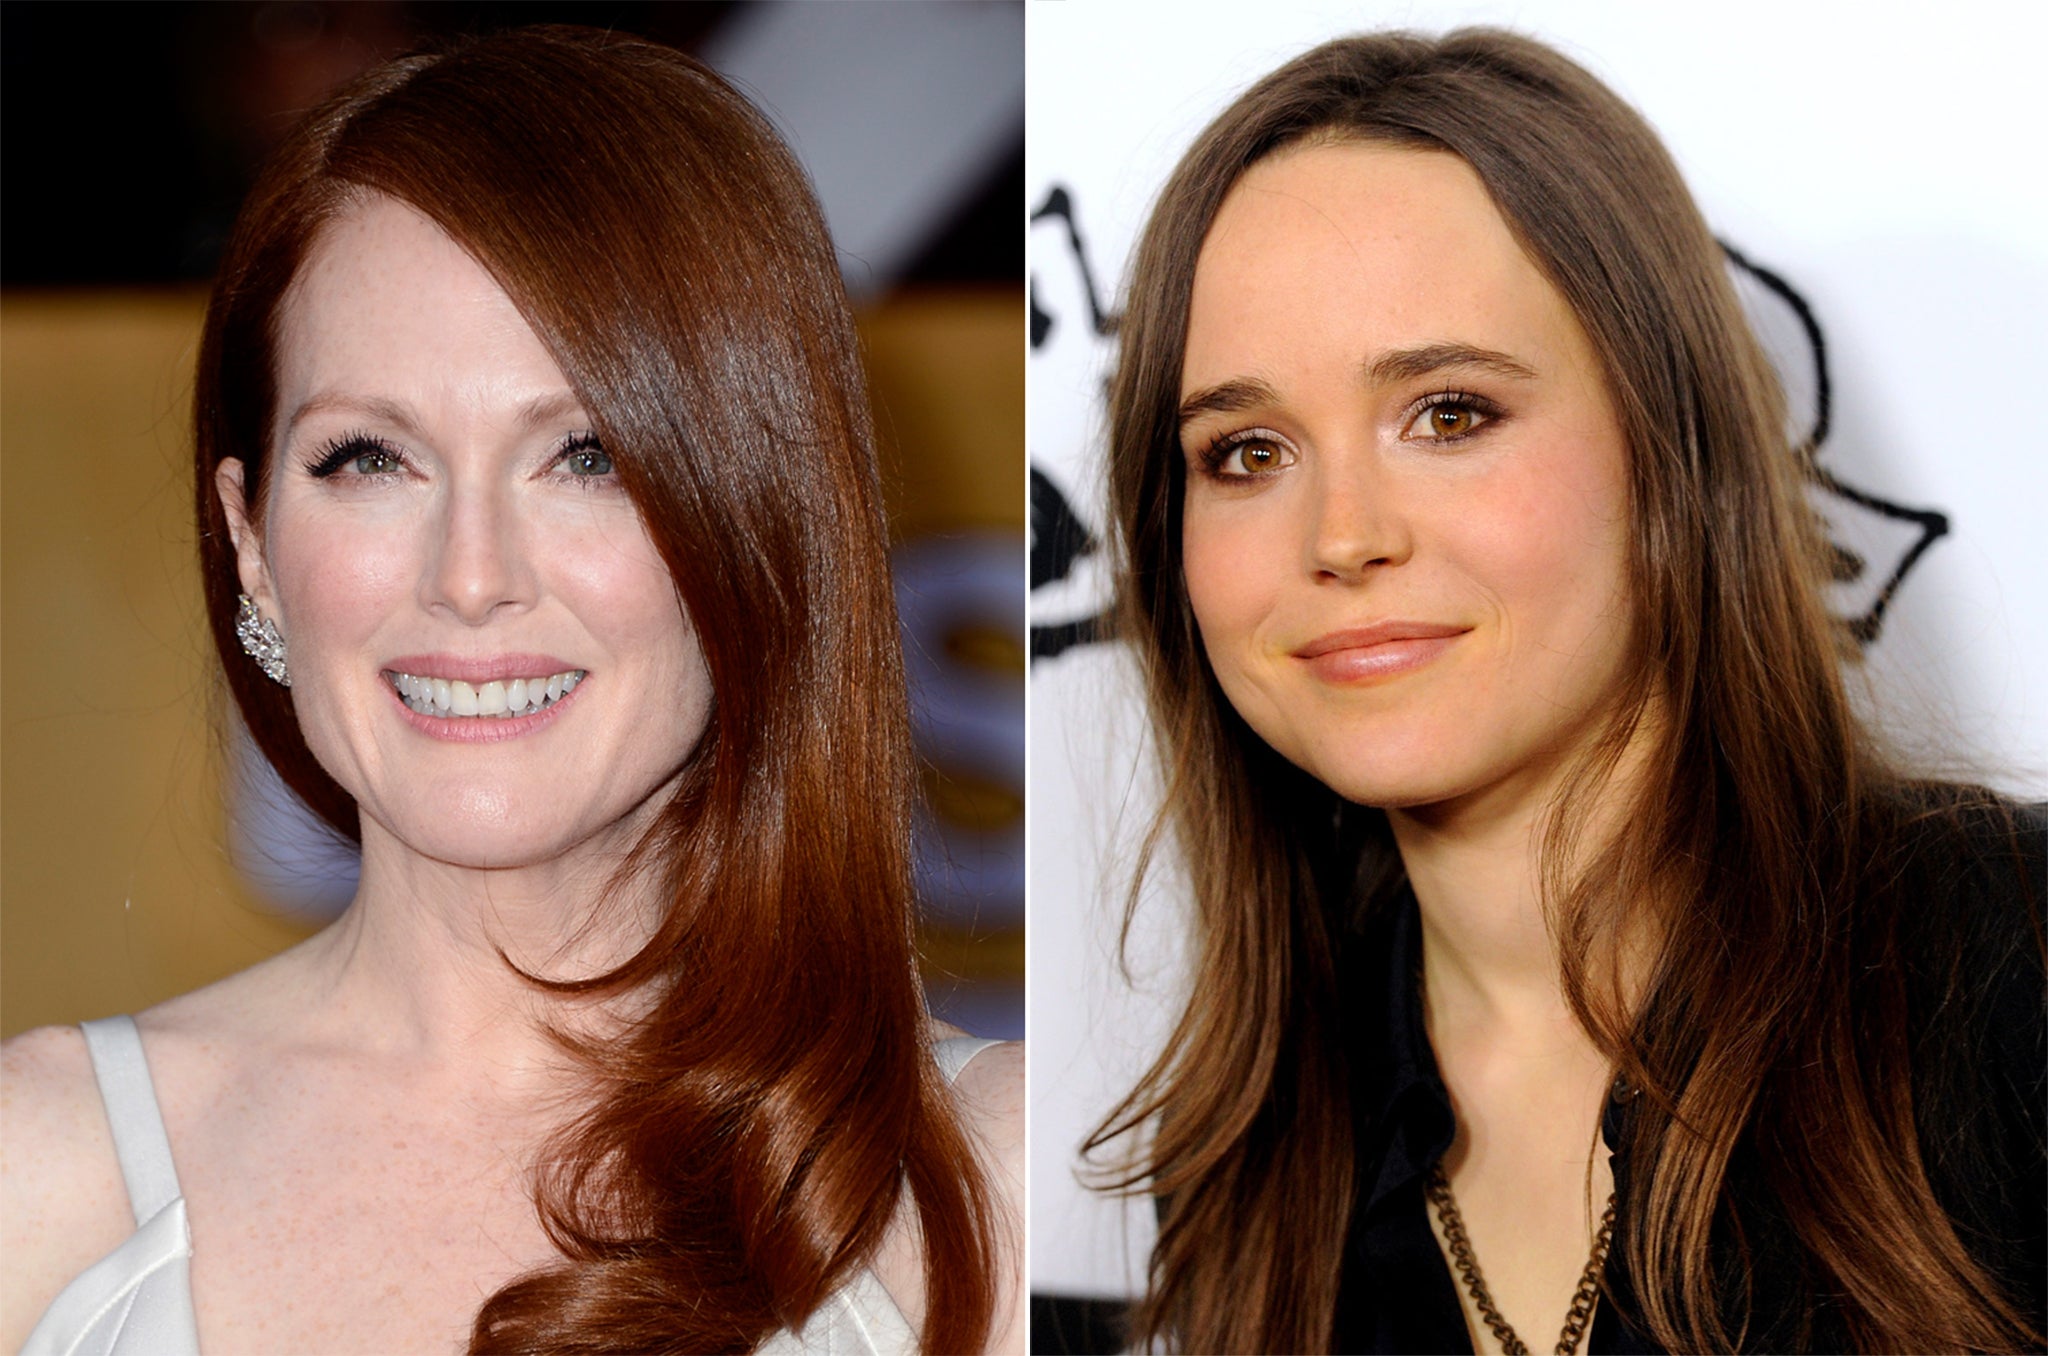 Julianne Moore and Ellen Page are starring together in civil rights drama Freeheld